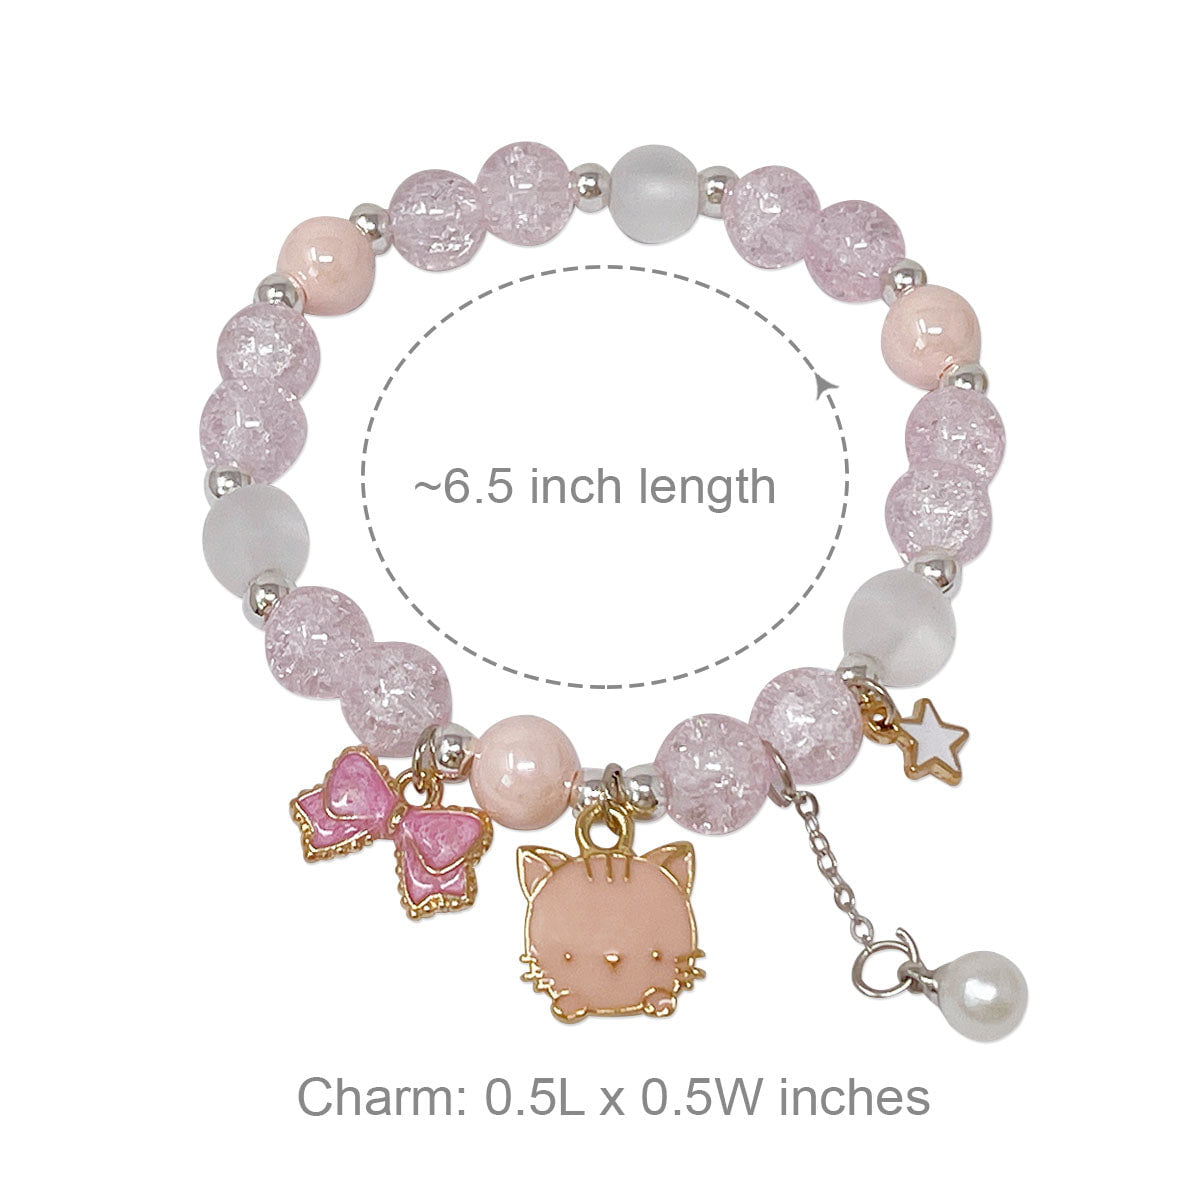 PINK HELLO KITTY Fairy Princess European Charm Bracelet With Pink Crystal  Beads $19.99 - PicClick